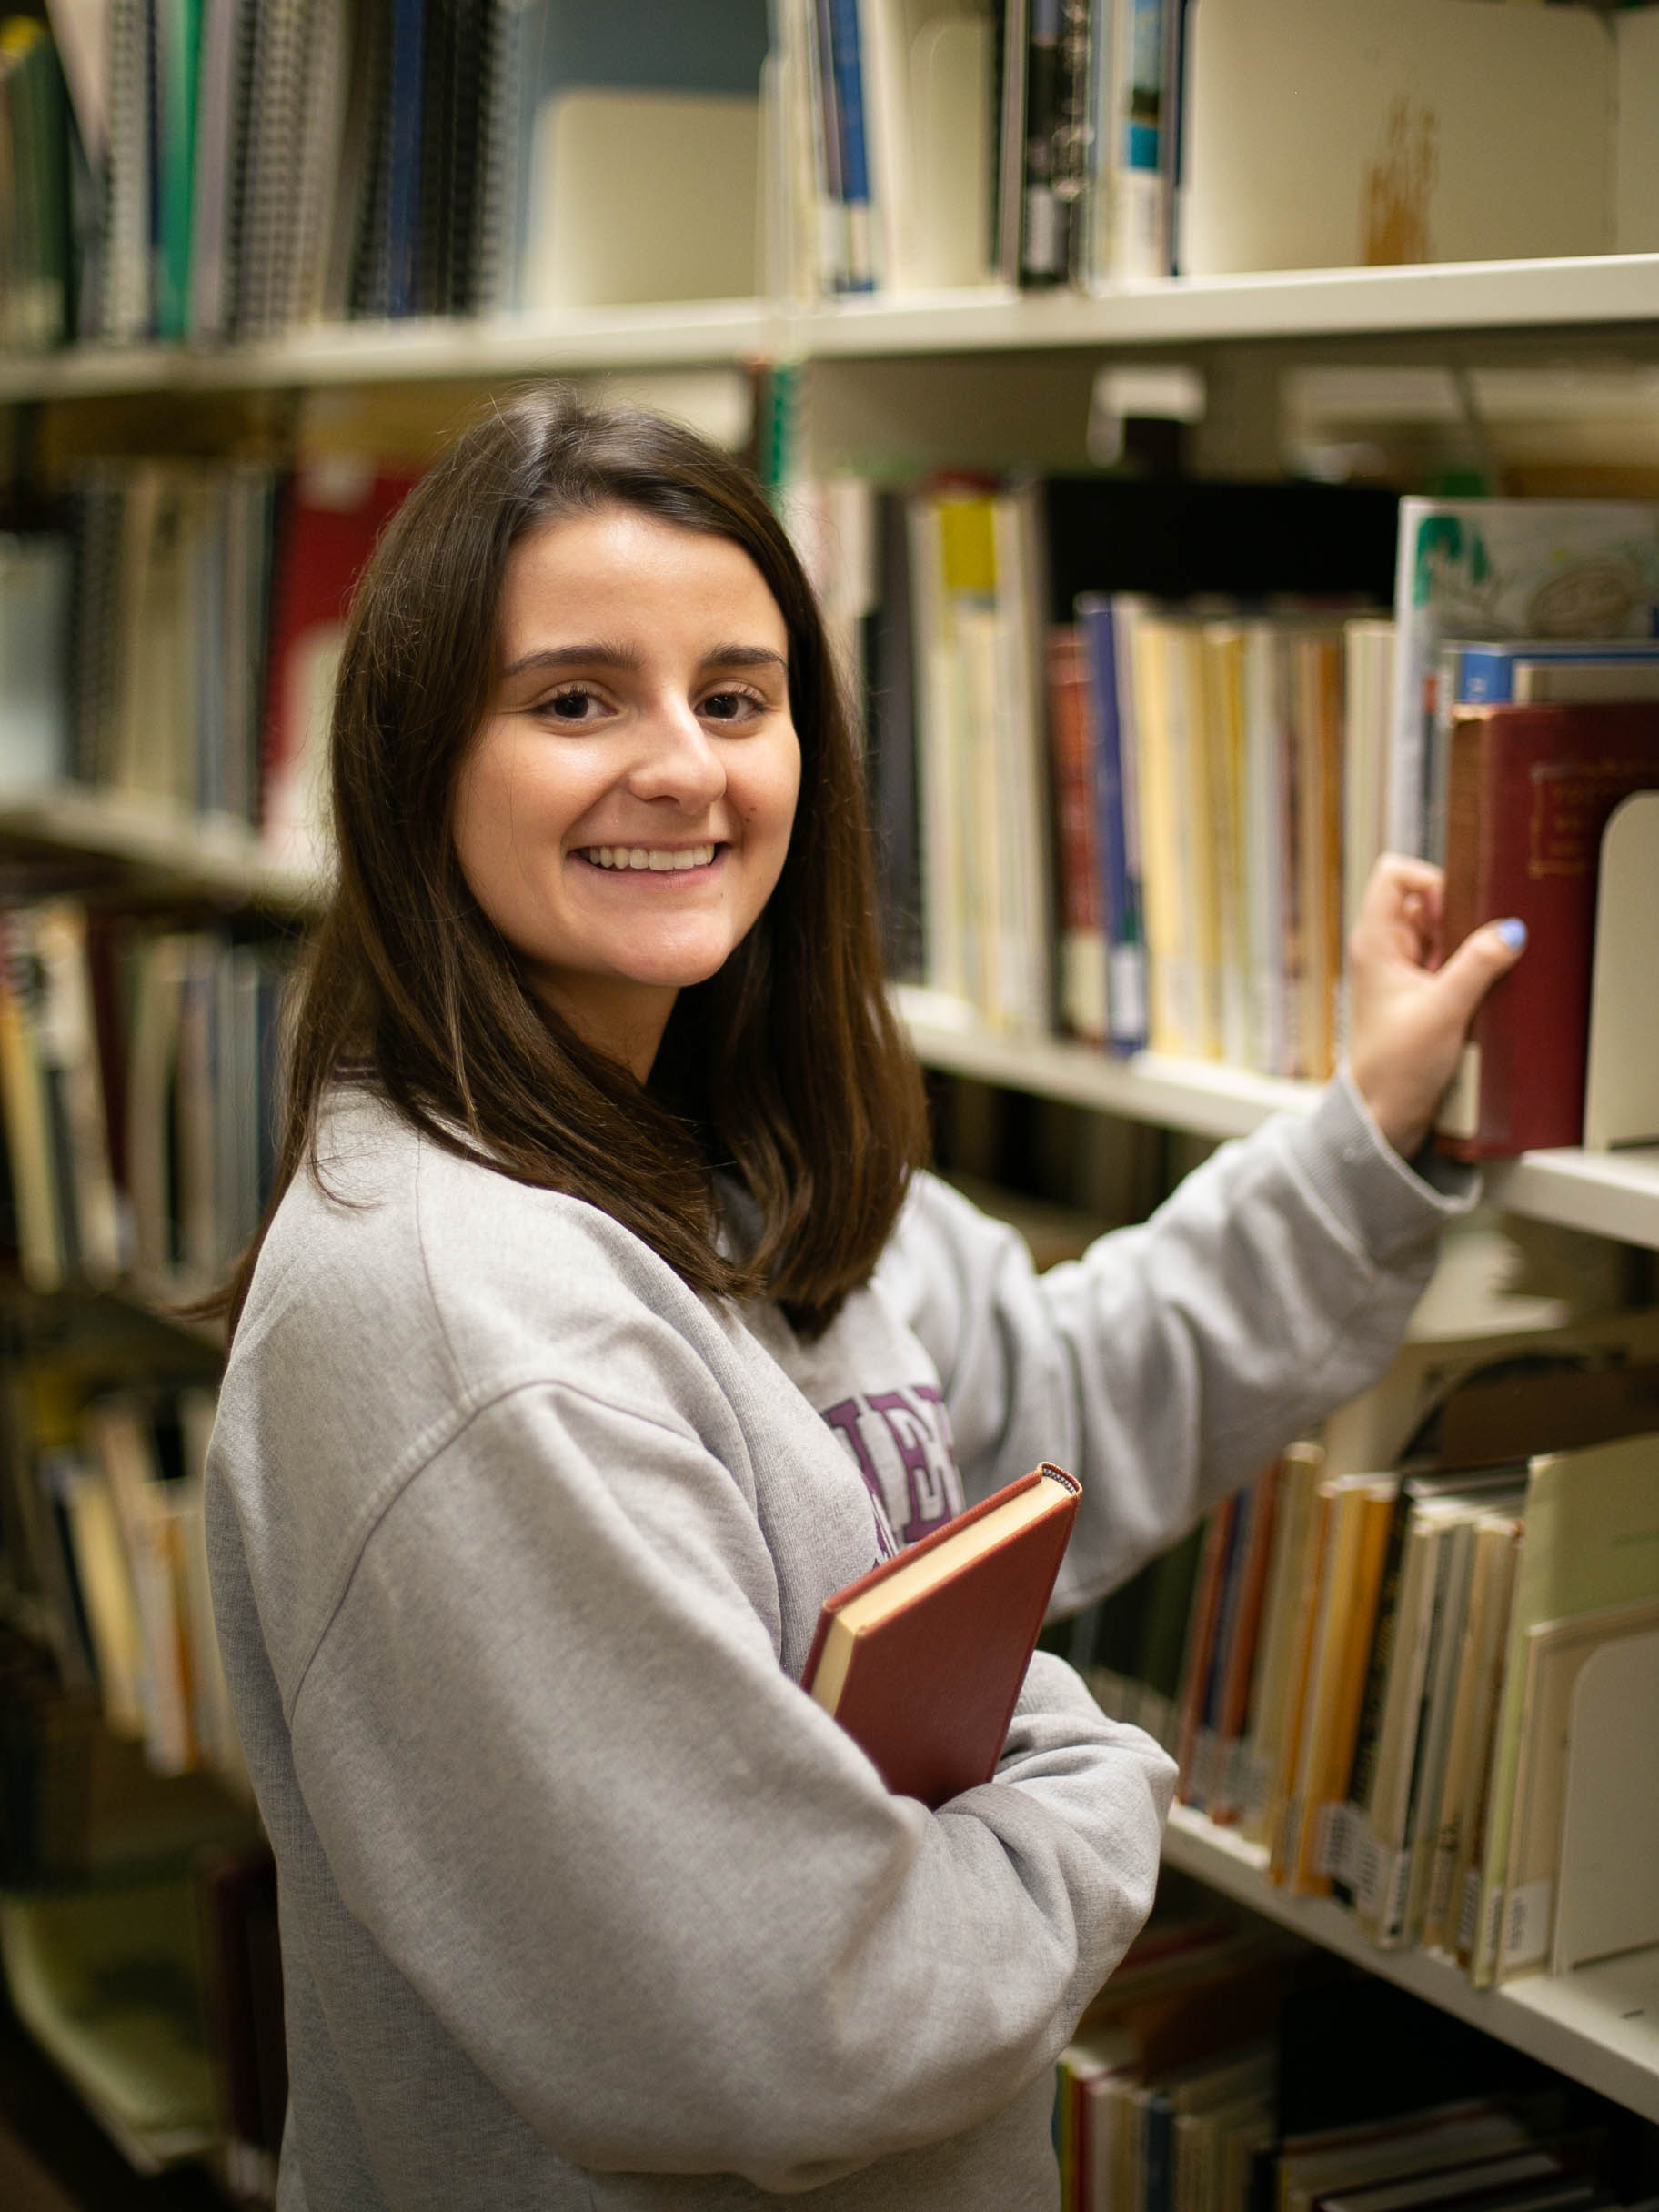 Maddie Savage is grabbing a book from a shelf while in the library